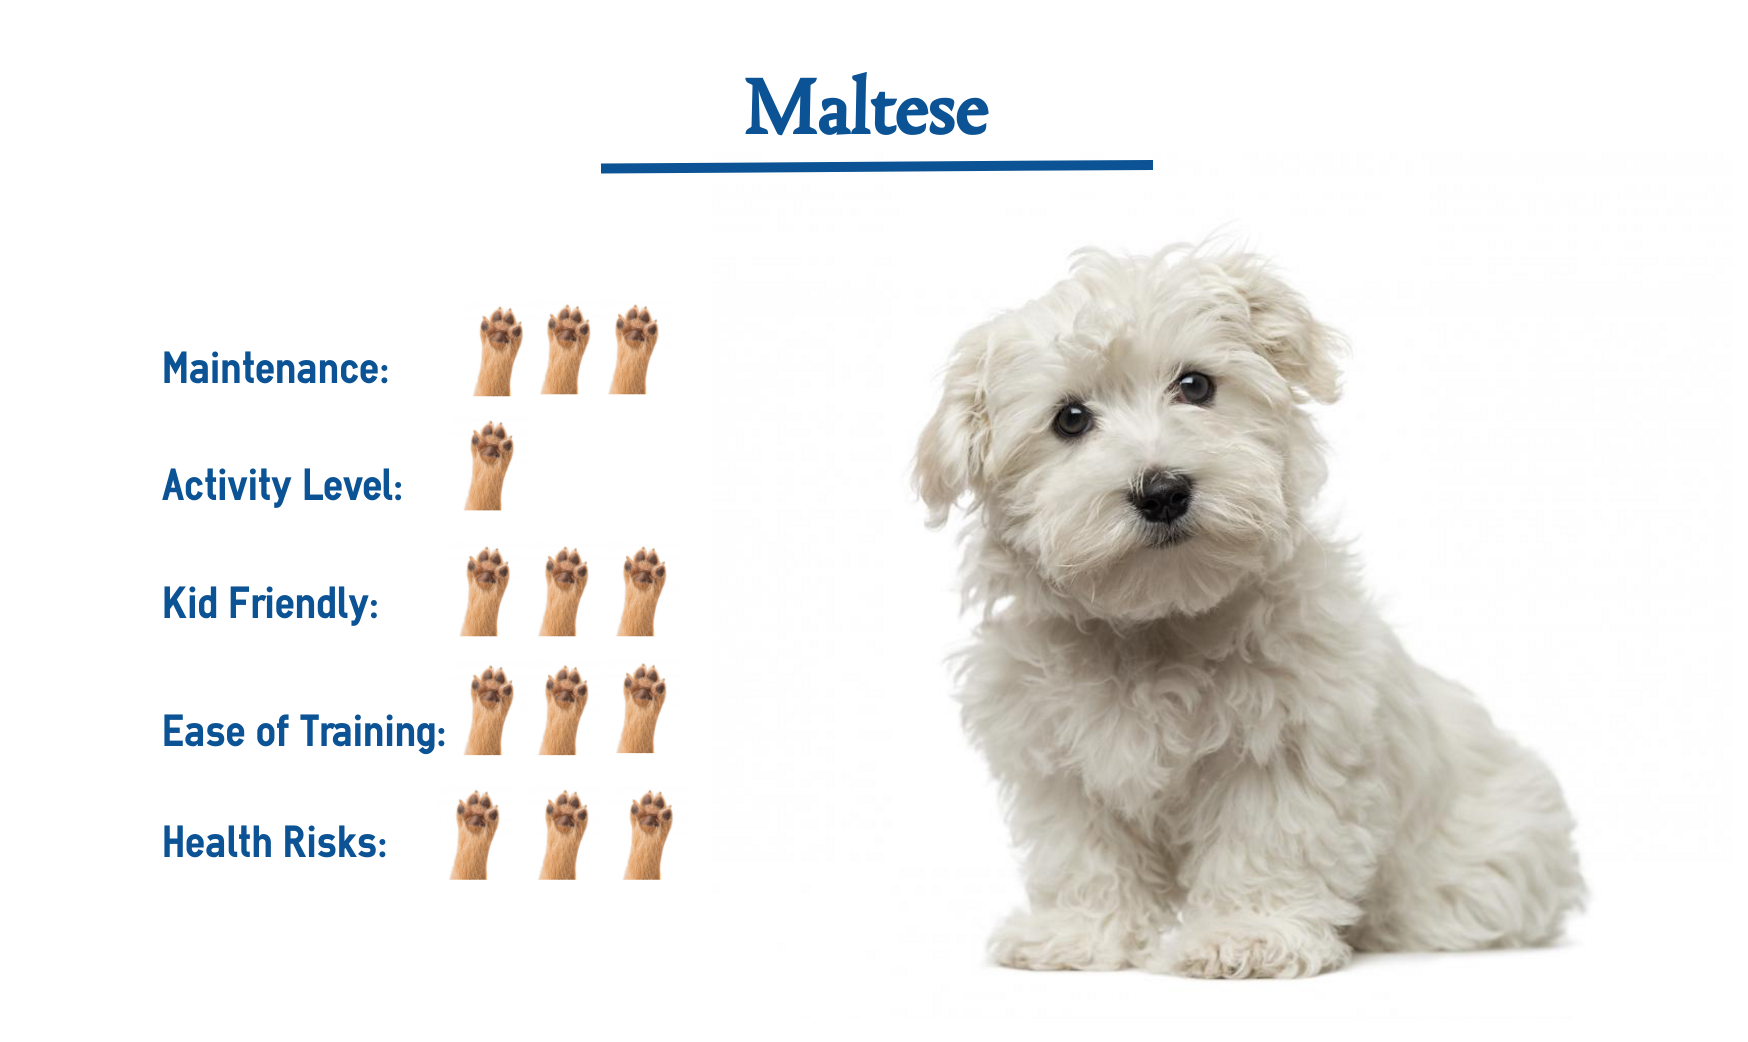 where are you from if you are maltese?